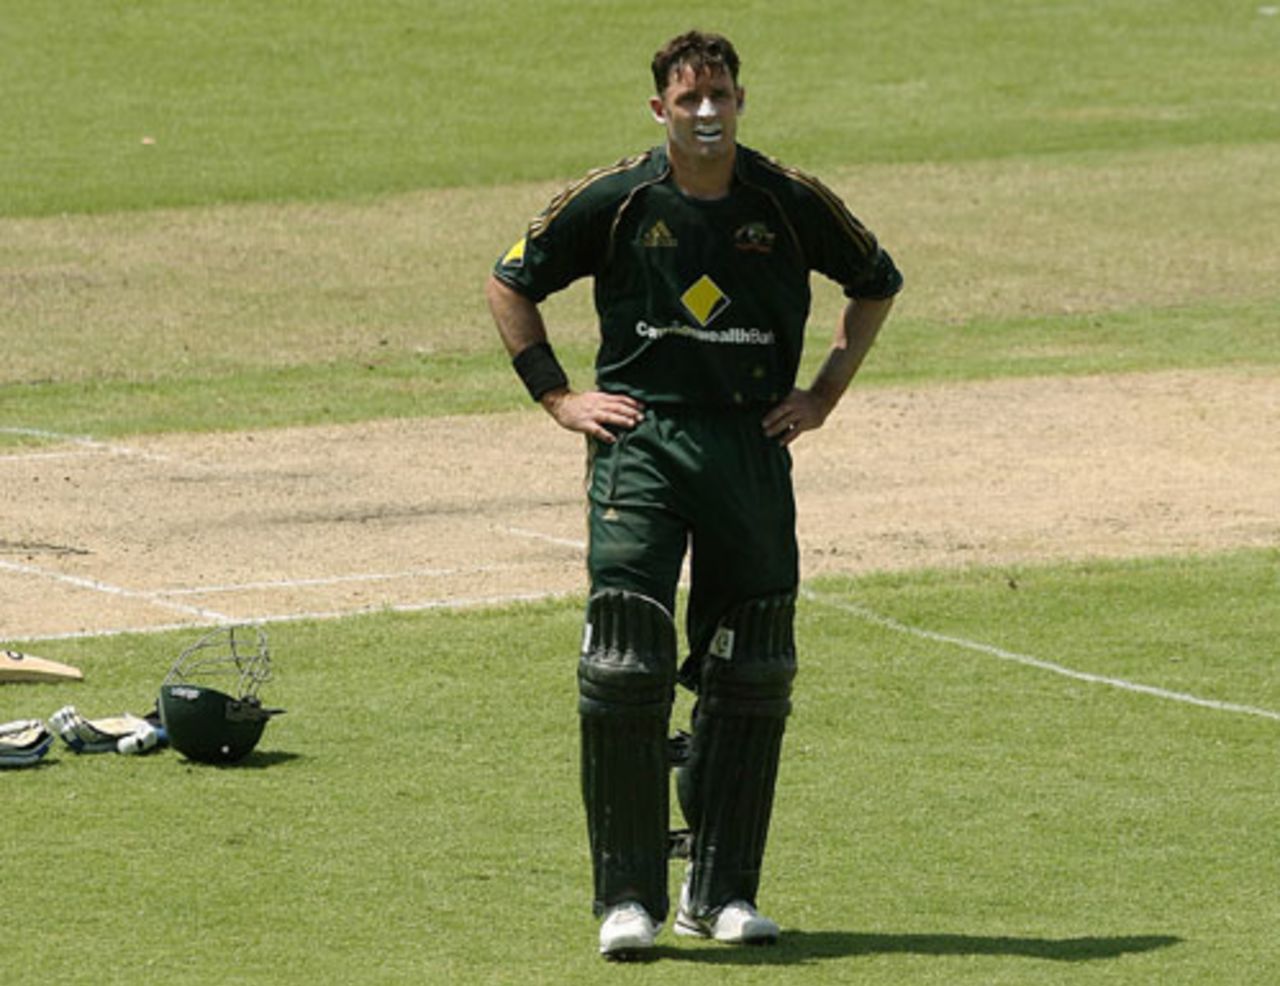 Michael Hussey feels the heat on the way to 57 not out, Australia v Bangladesh, 3rd ODI, Darwin, September 6, 2008